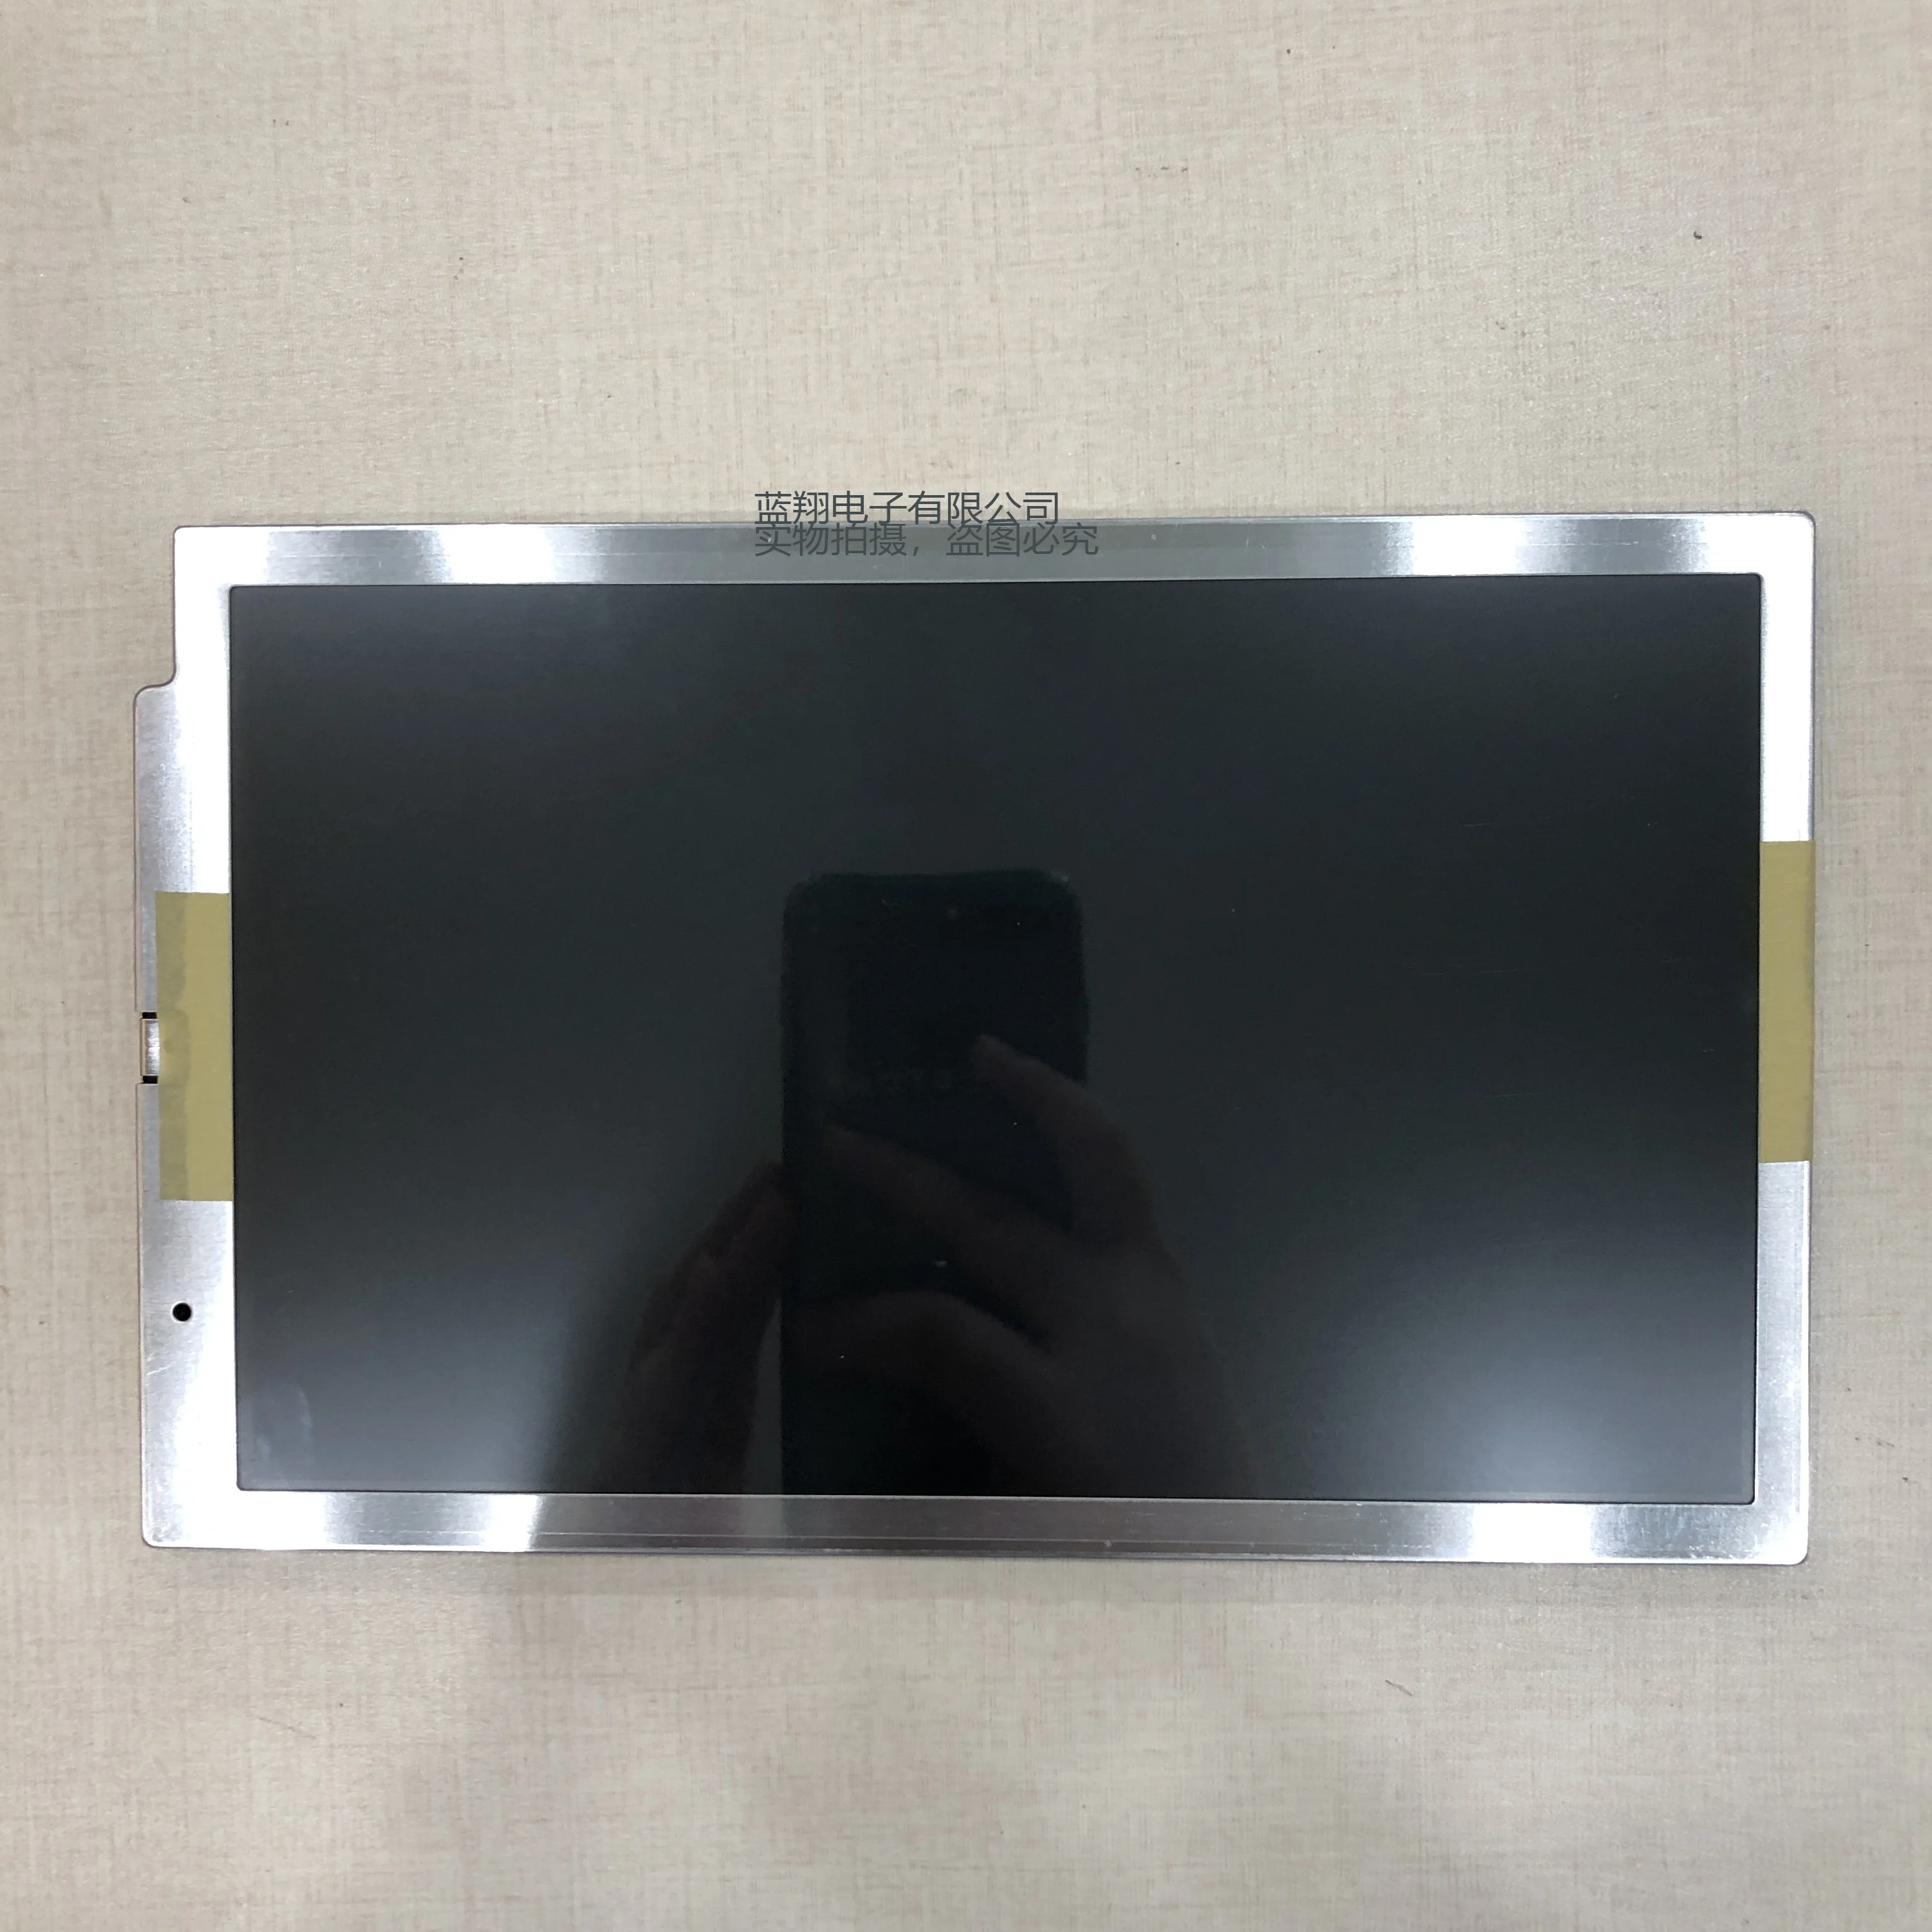 LCD Display for NL8048BC24-09D LCD Display Panel Brand New & Original lt050ca37000 brand new original 5 inch 320 240 lcd display for industrial equipment